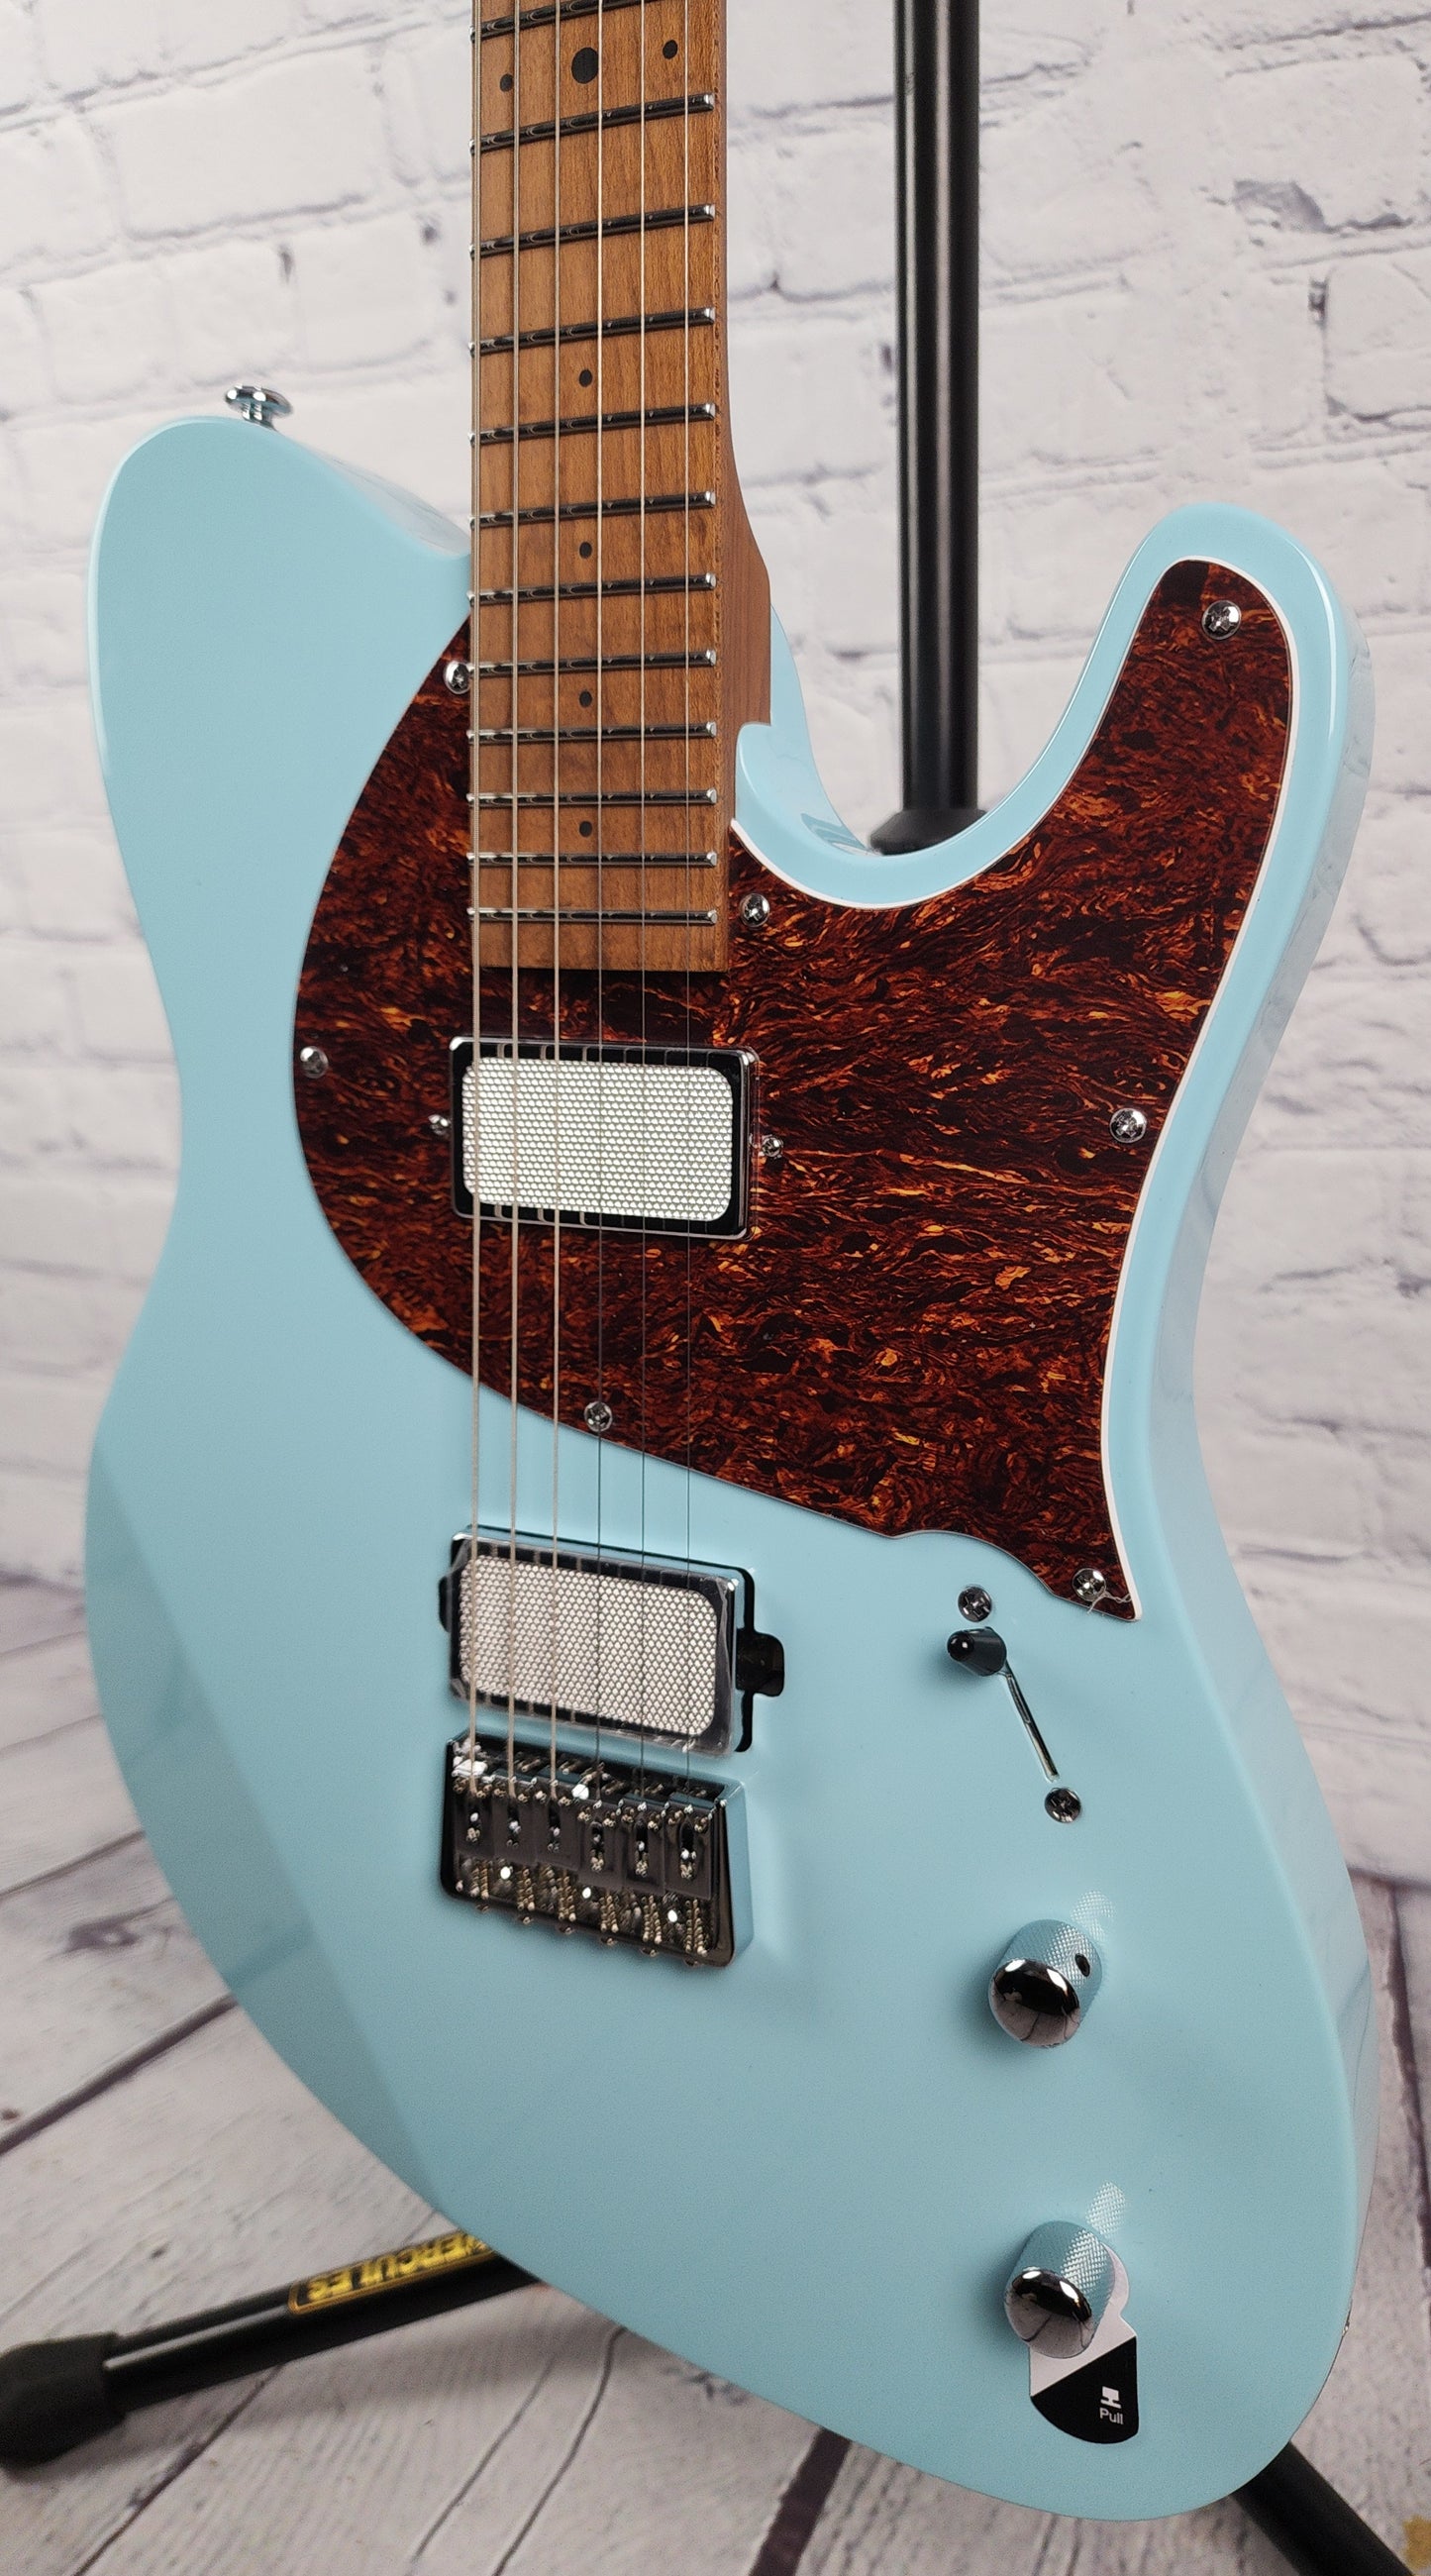 Balaguer Standard Thicket HH 6 String Electric Guitar Gloss Pastel Blue